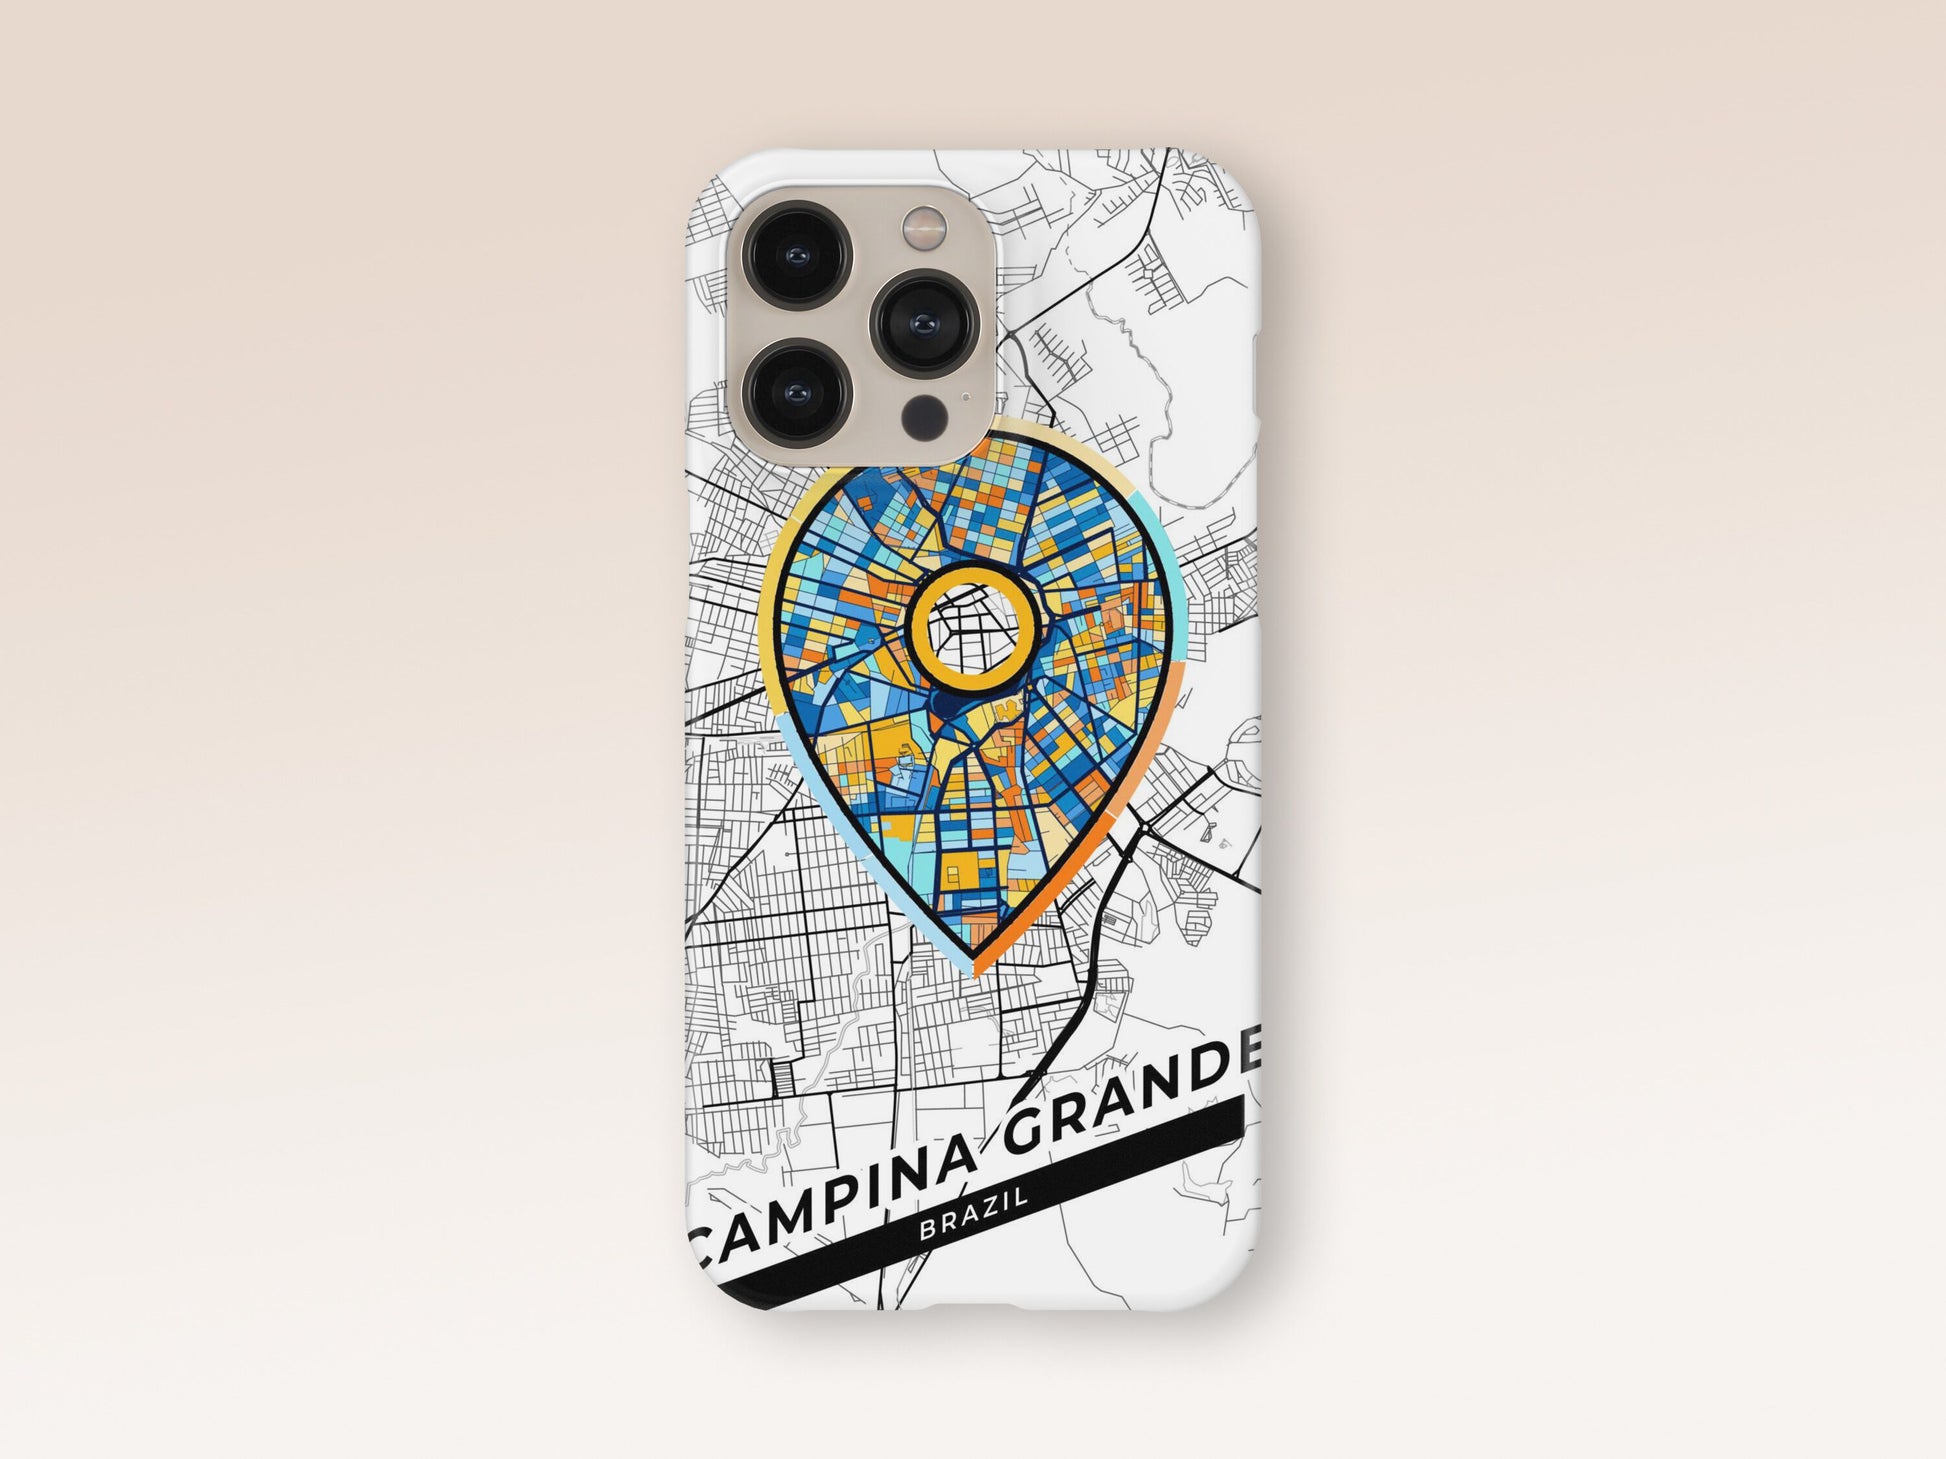 Campina Grande Brazil slim phone case with colorful icon. Birthday, wedding or housewarming gift. Couple match cases. 1